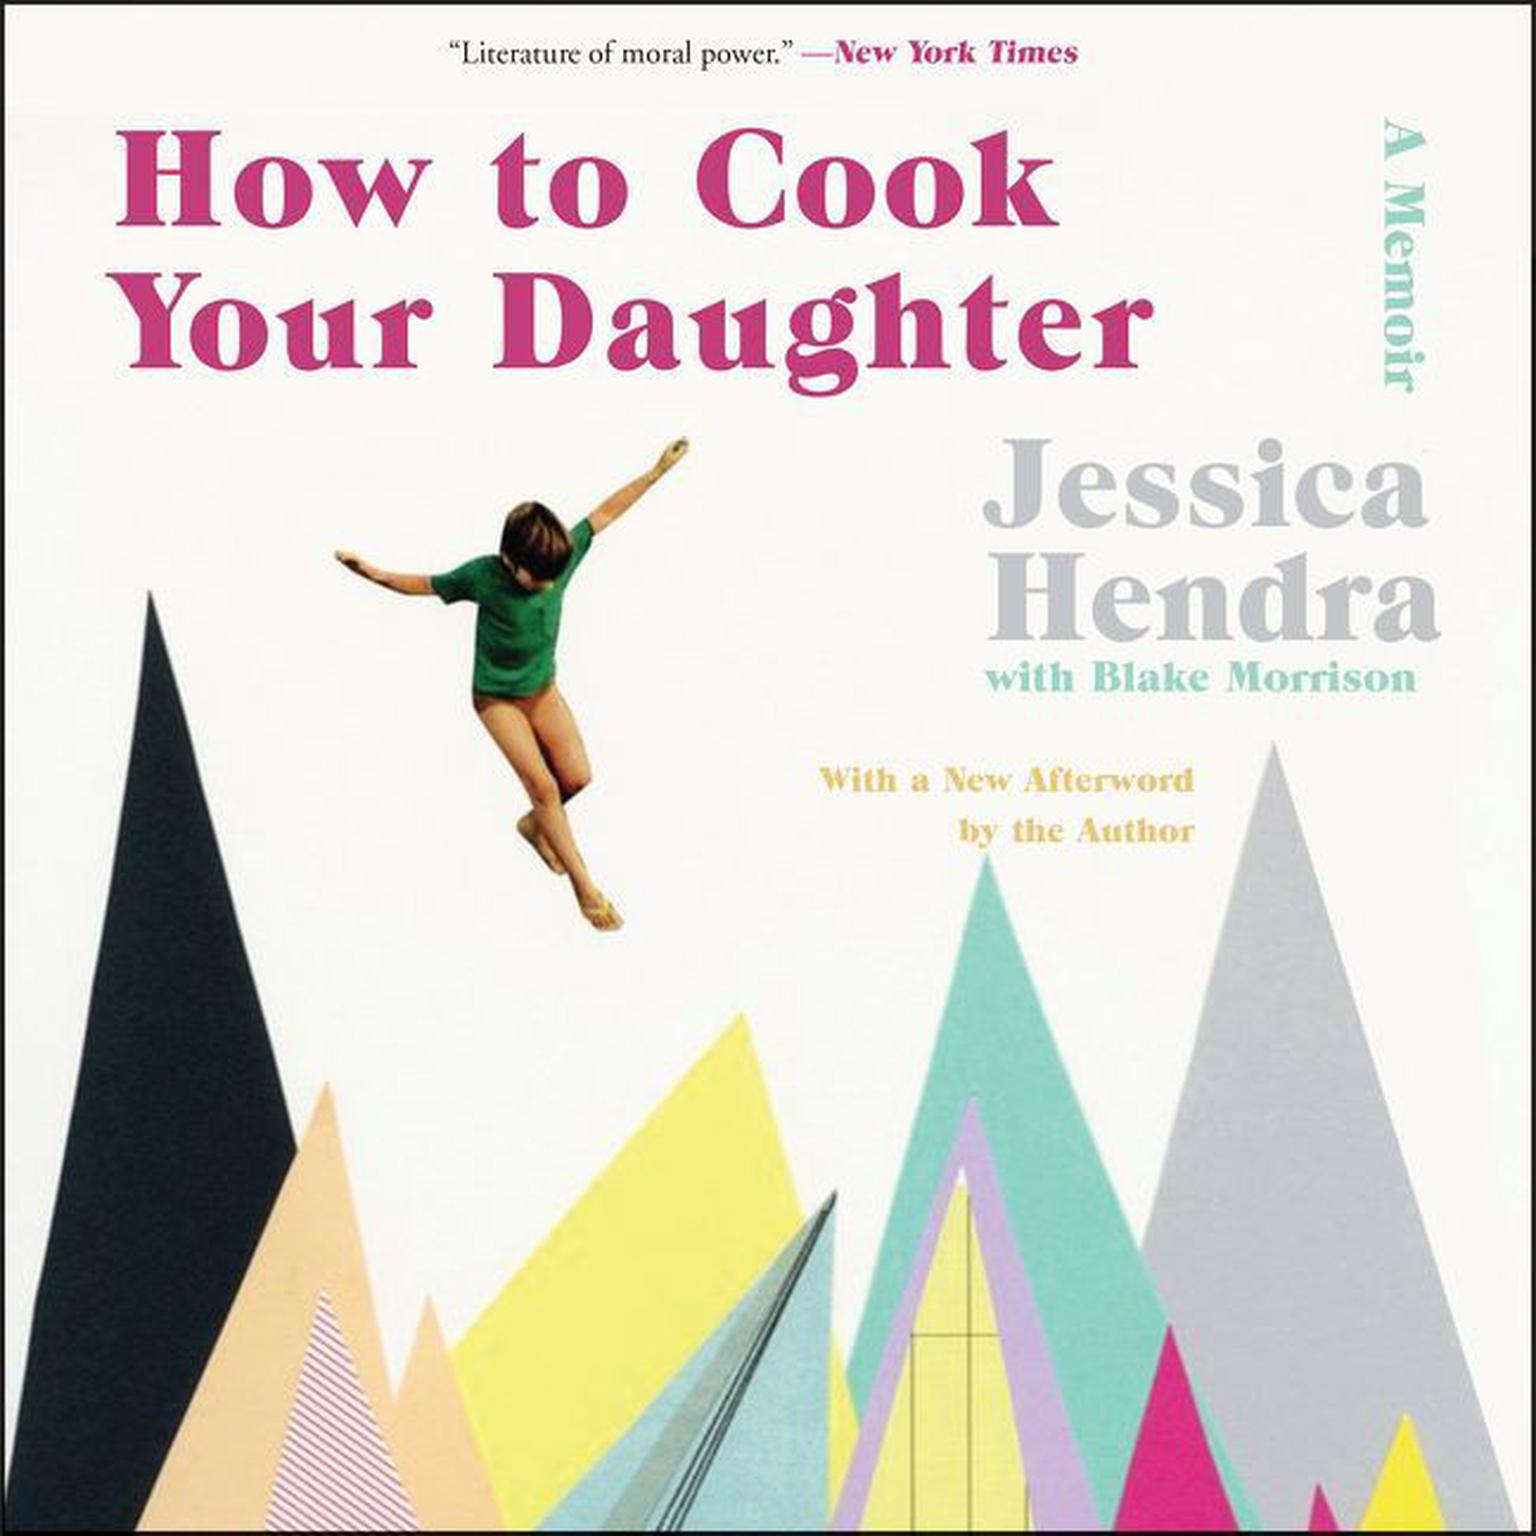 How to Cook Your Daughter: A Memoir Audiobook, by Jessica Hendra